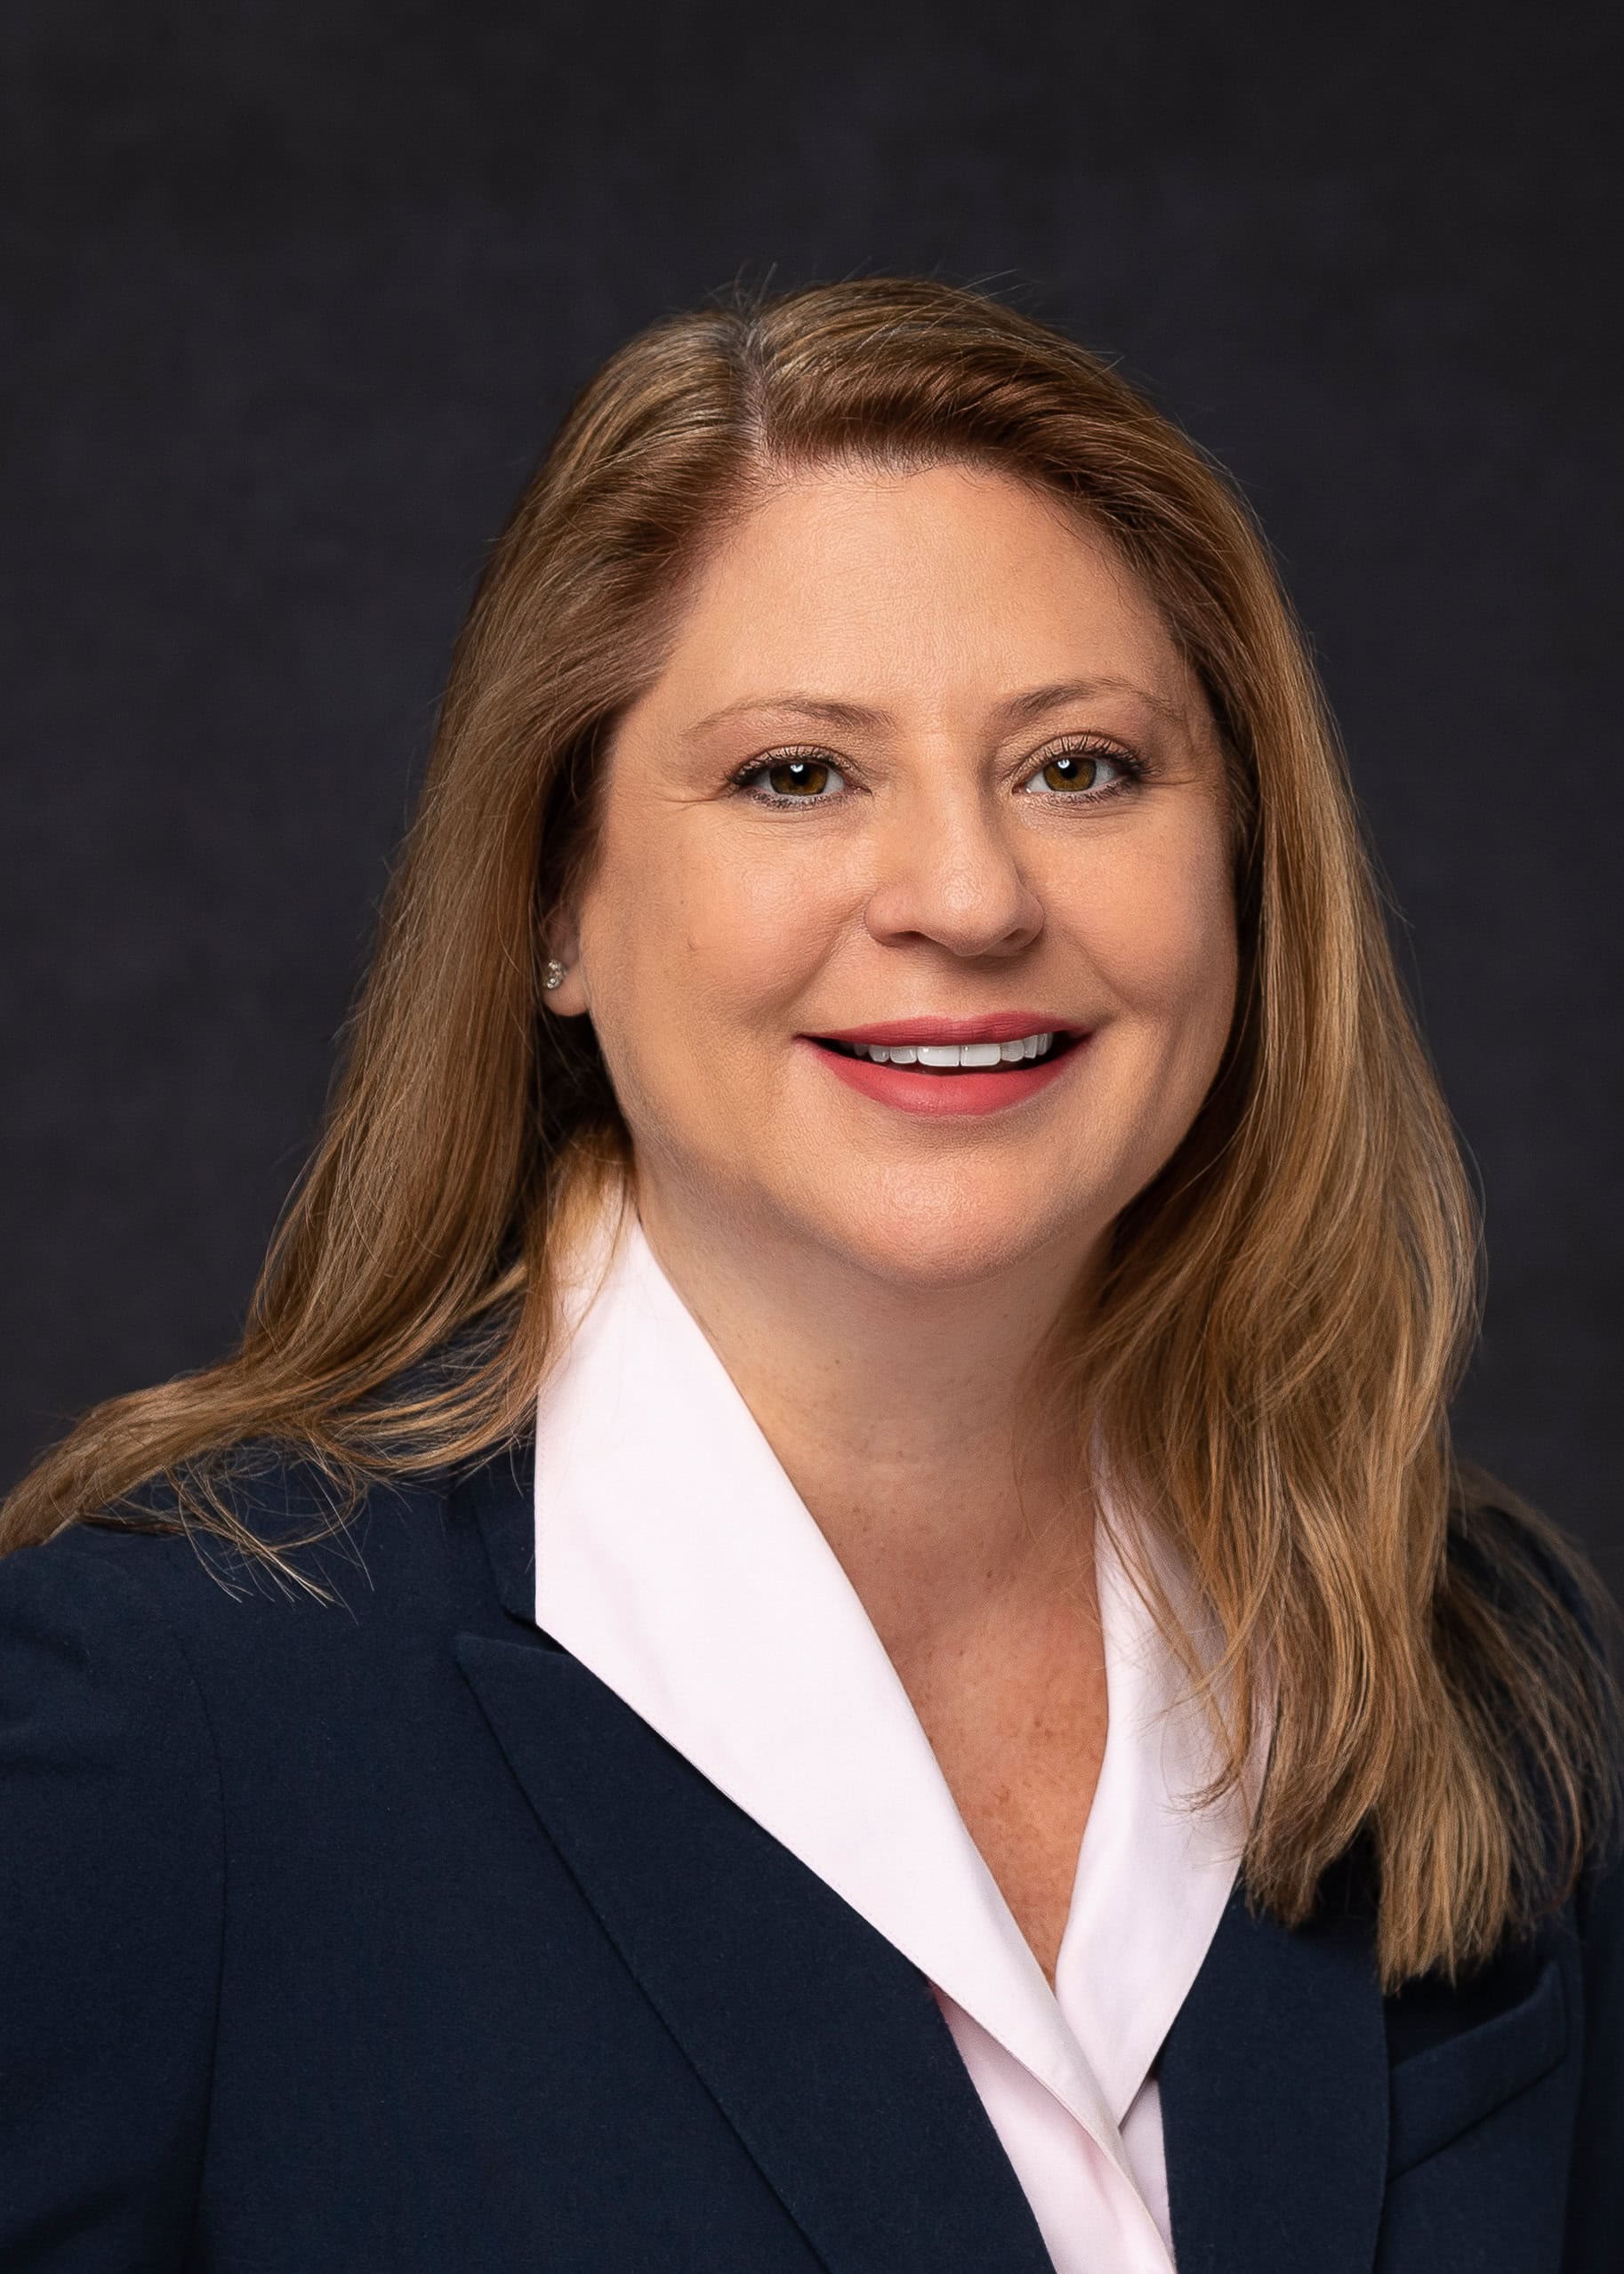 Insurance industry female executive smiling and looking directly at the lens for a professional headshot. With long, light brown and blonde hair and red lipstick. Wearing white top and dark blue blazer set against a dark-grey backdrop under studio lighting. 